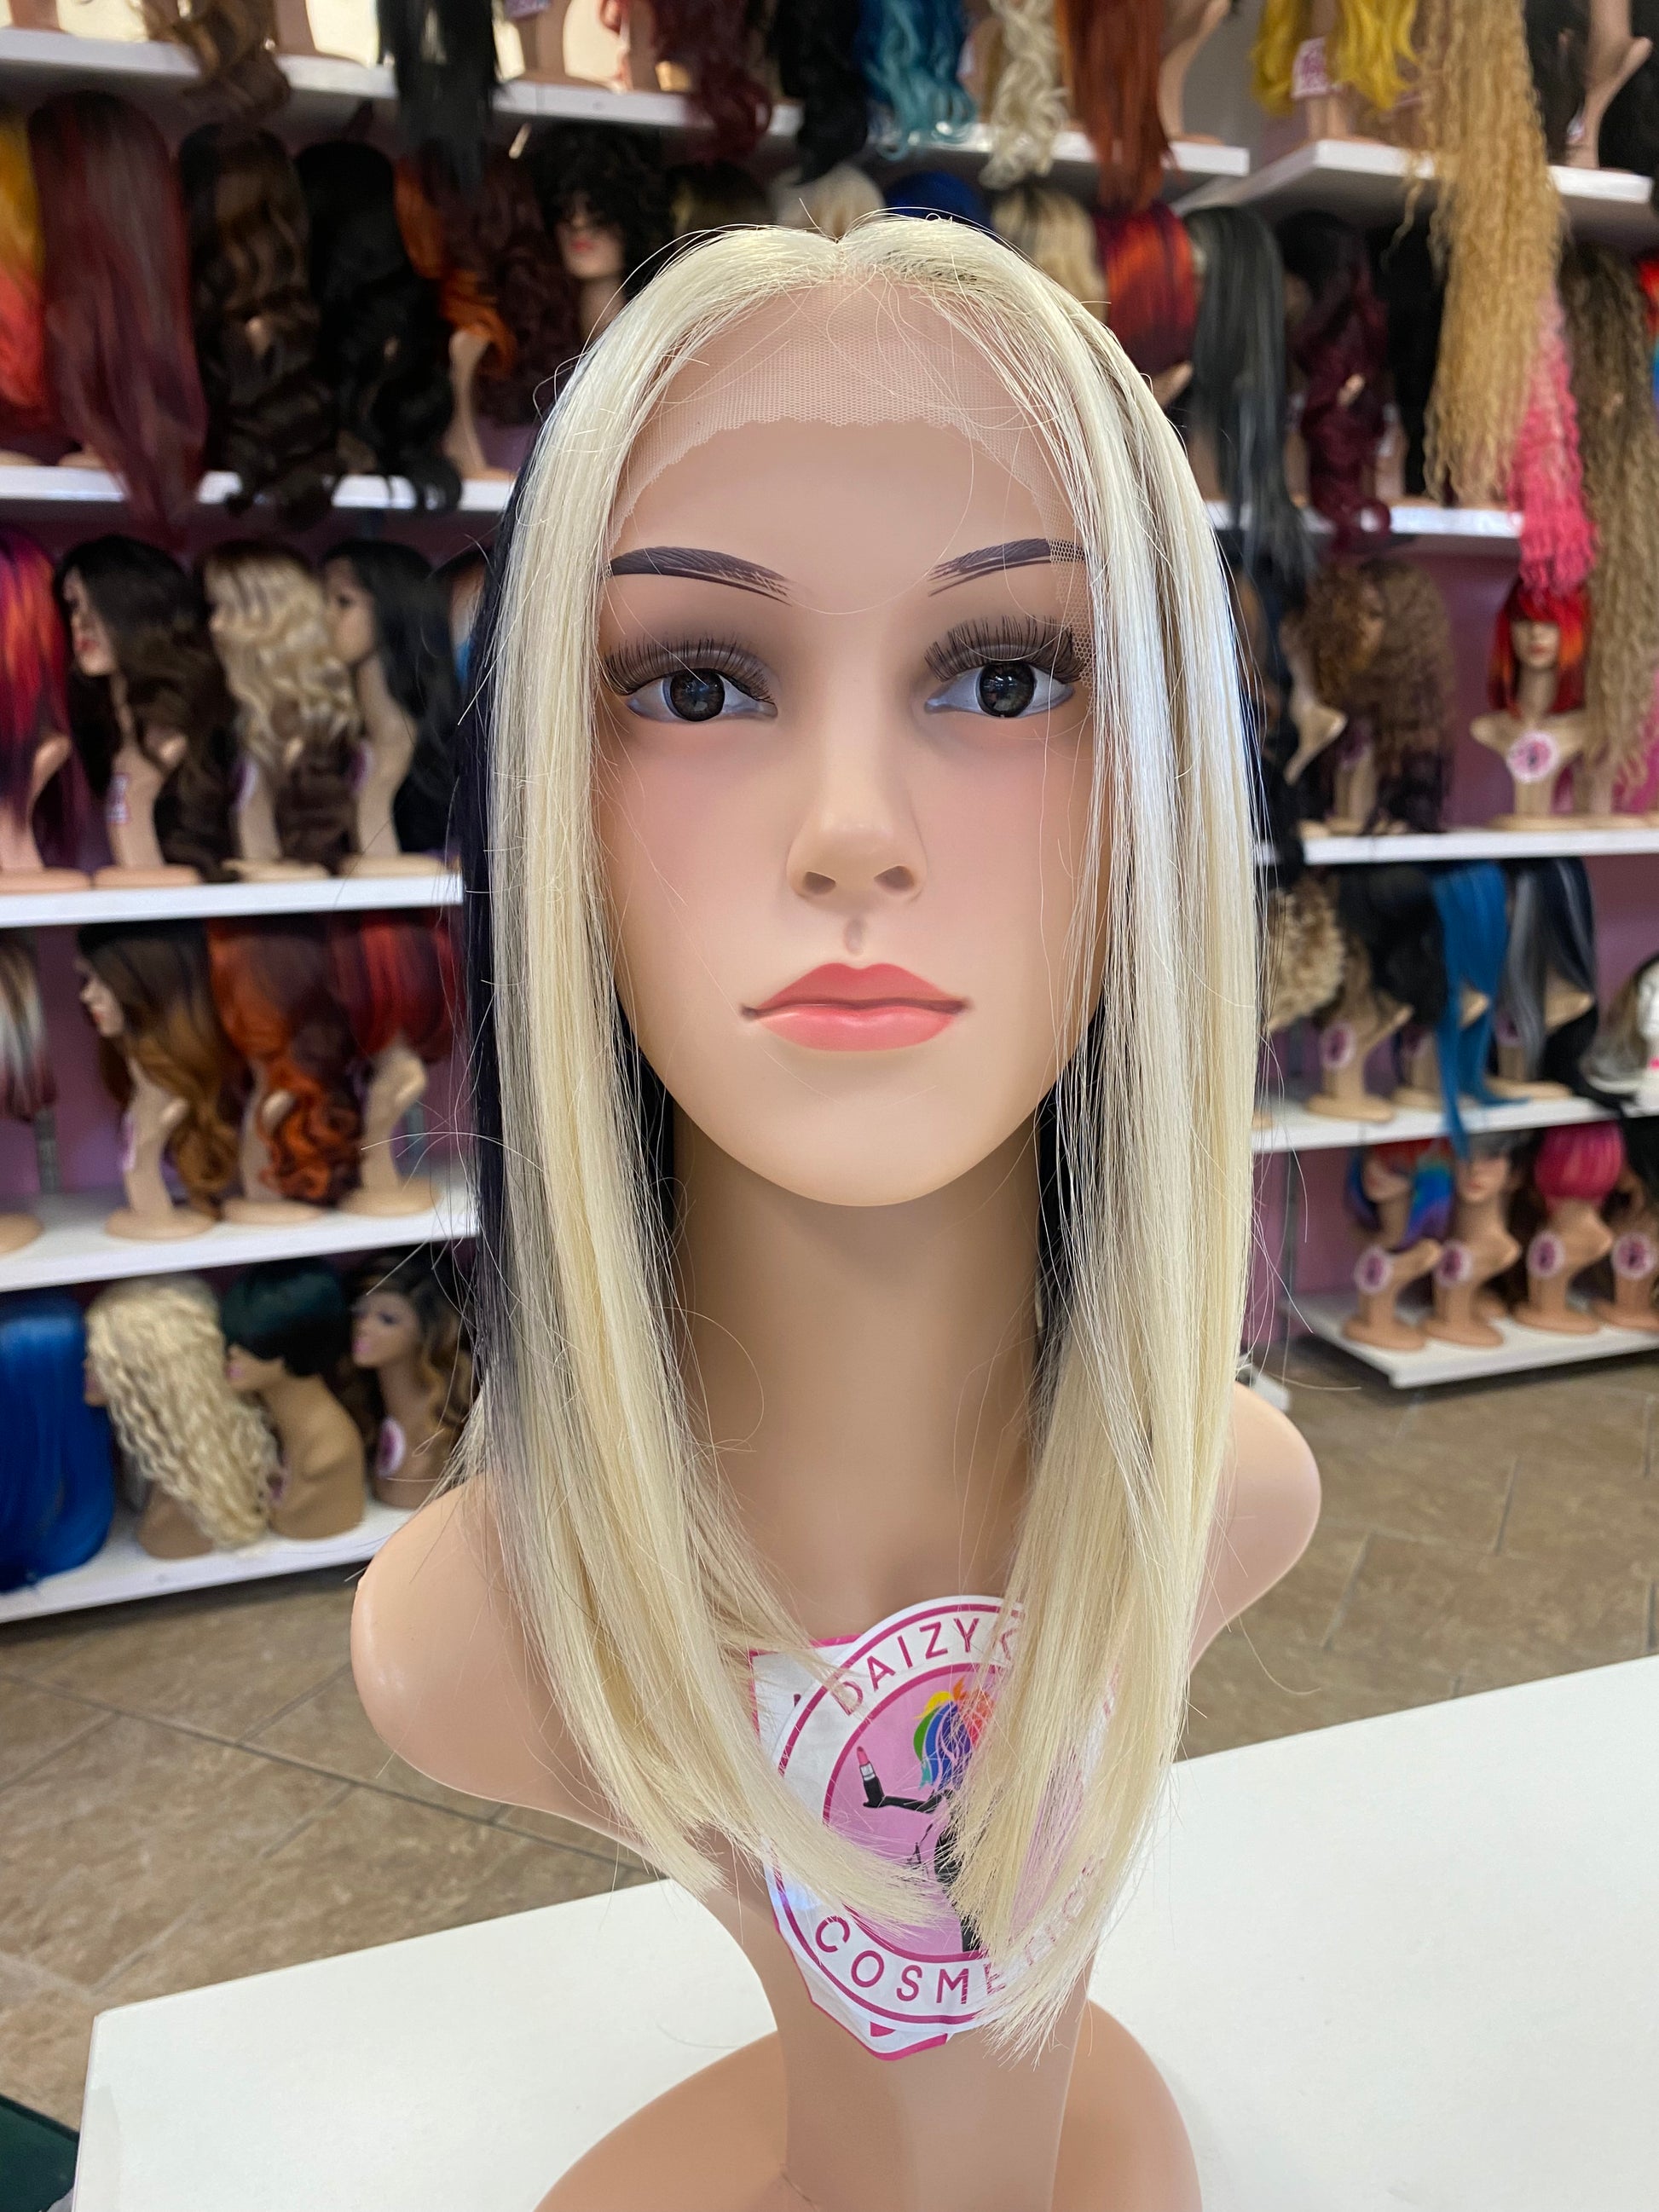 Hannah - Middle Part Lace Front Wig - 1/613 - DaizyKat Cosmetics Hannah - Middle Part Lace Front Wig - 1/613 DaizyKat Cosmetics Wigs